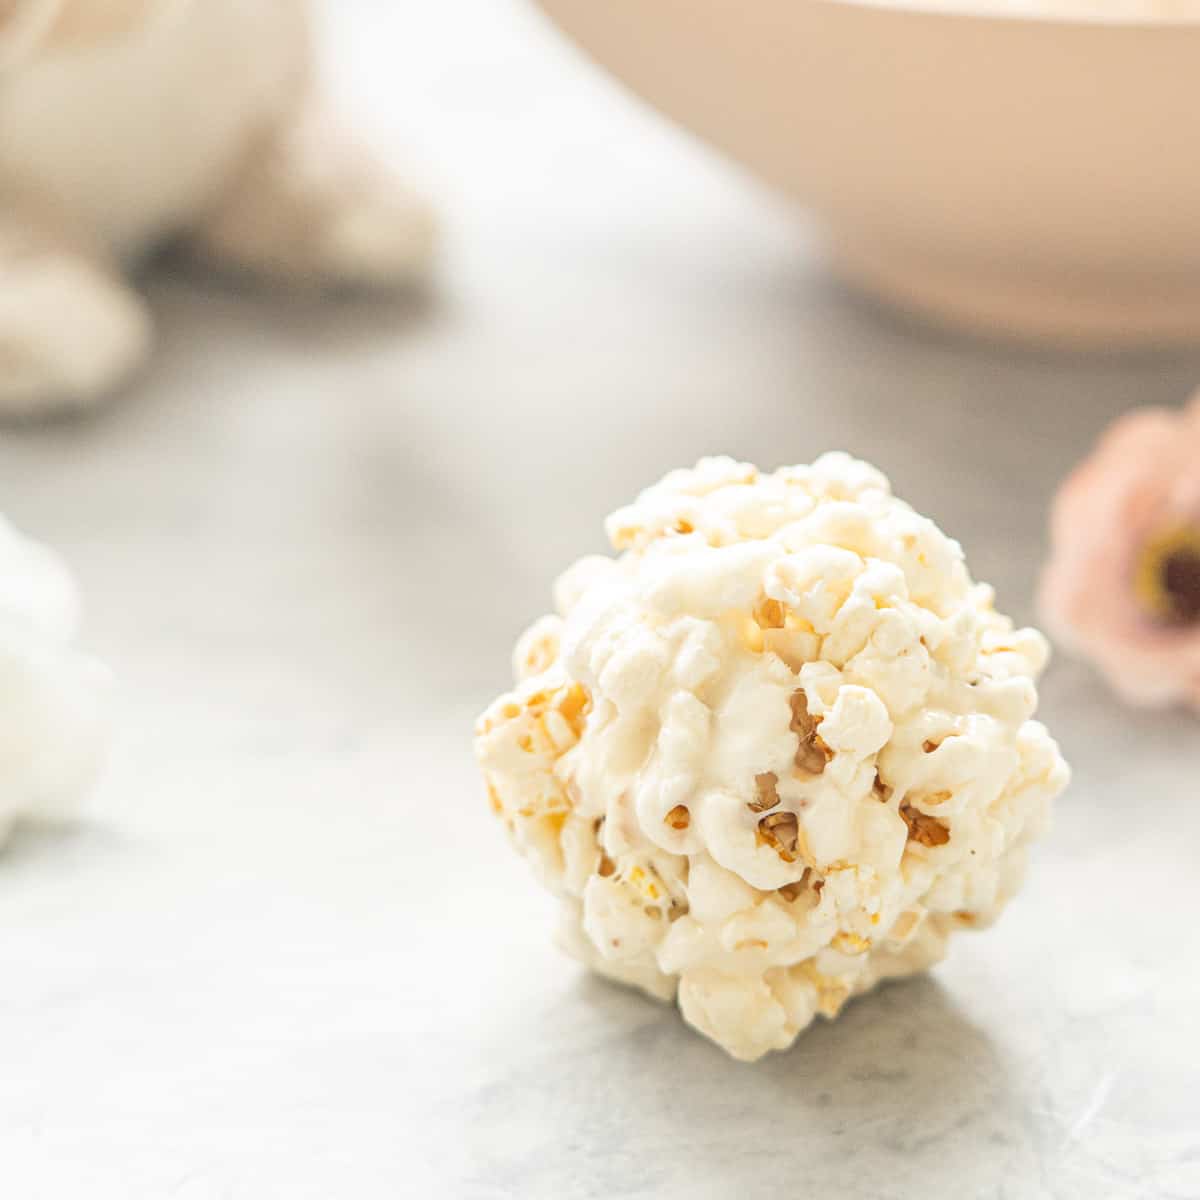 Close up of a popcorn ball on a marble bench.